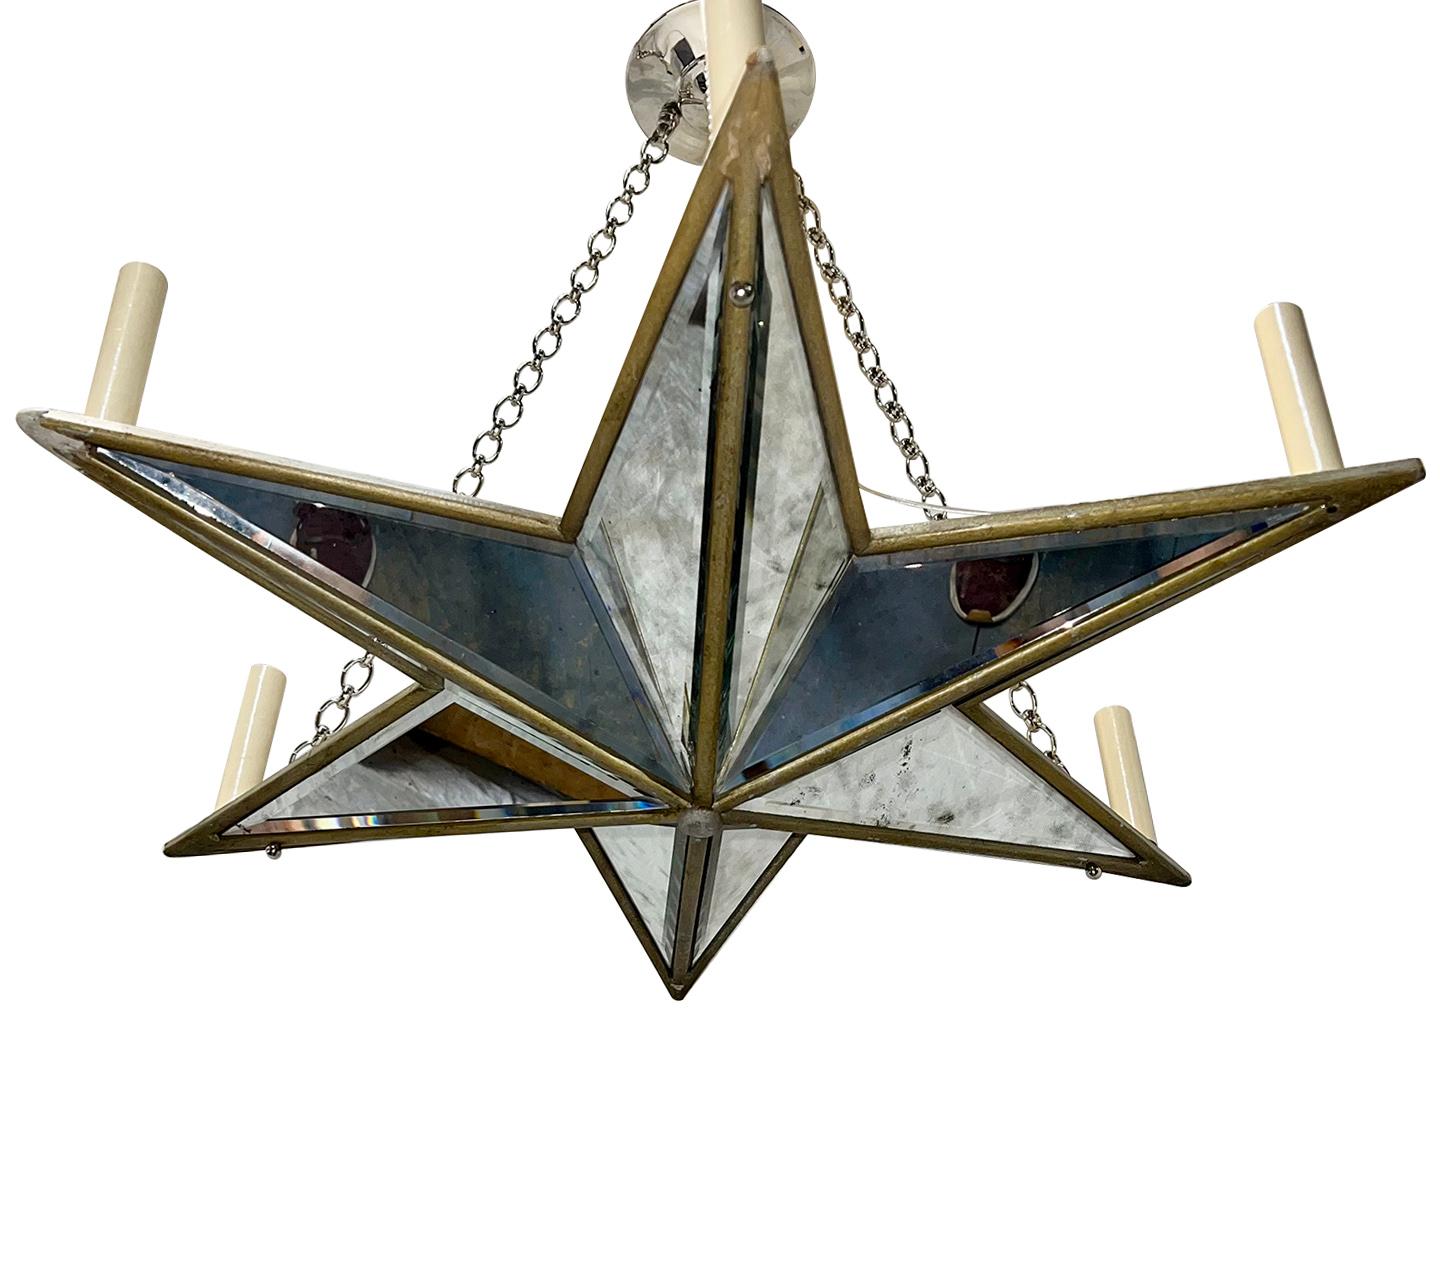 A circa 1960's French star shaped chandelier with 6 lights.

Measurements:
Present Drop: 25